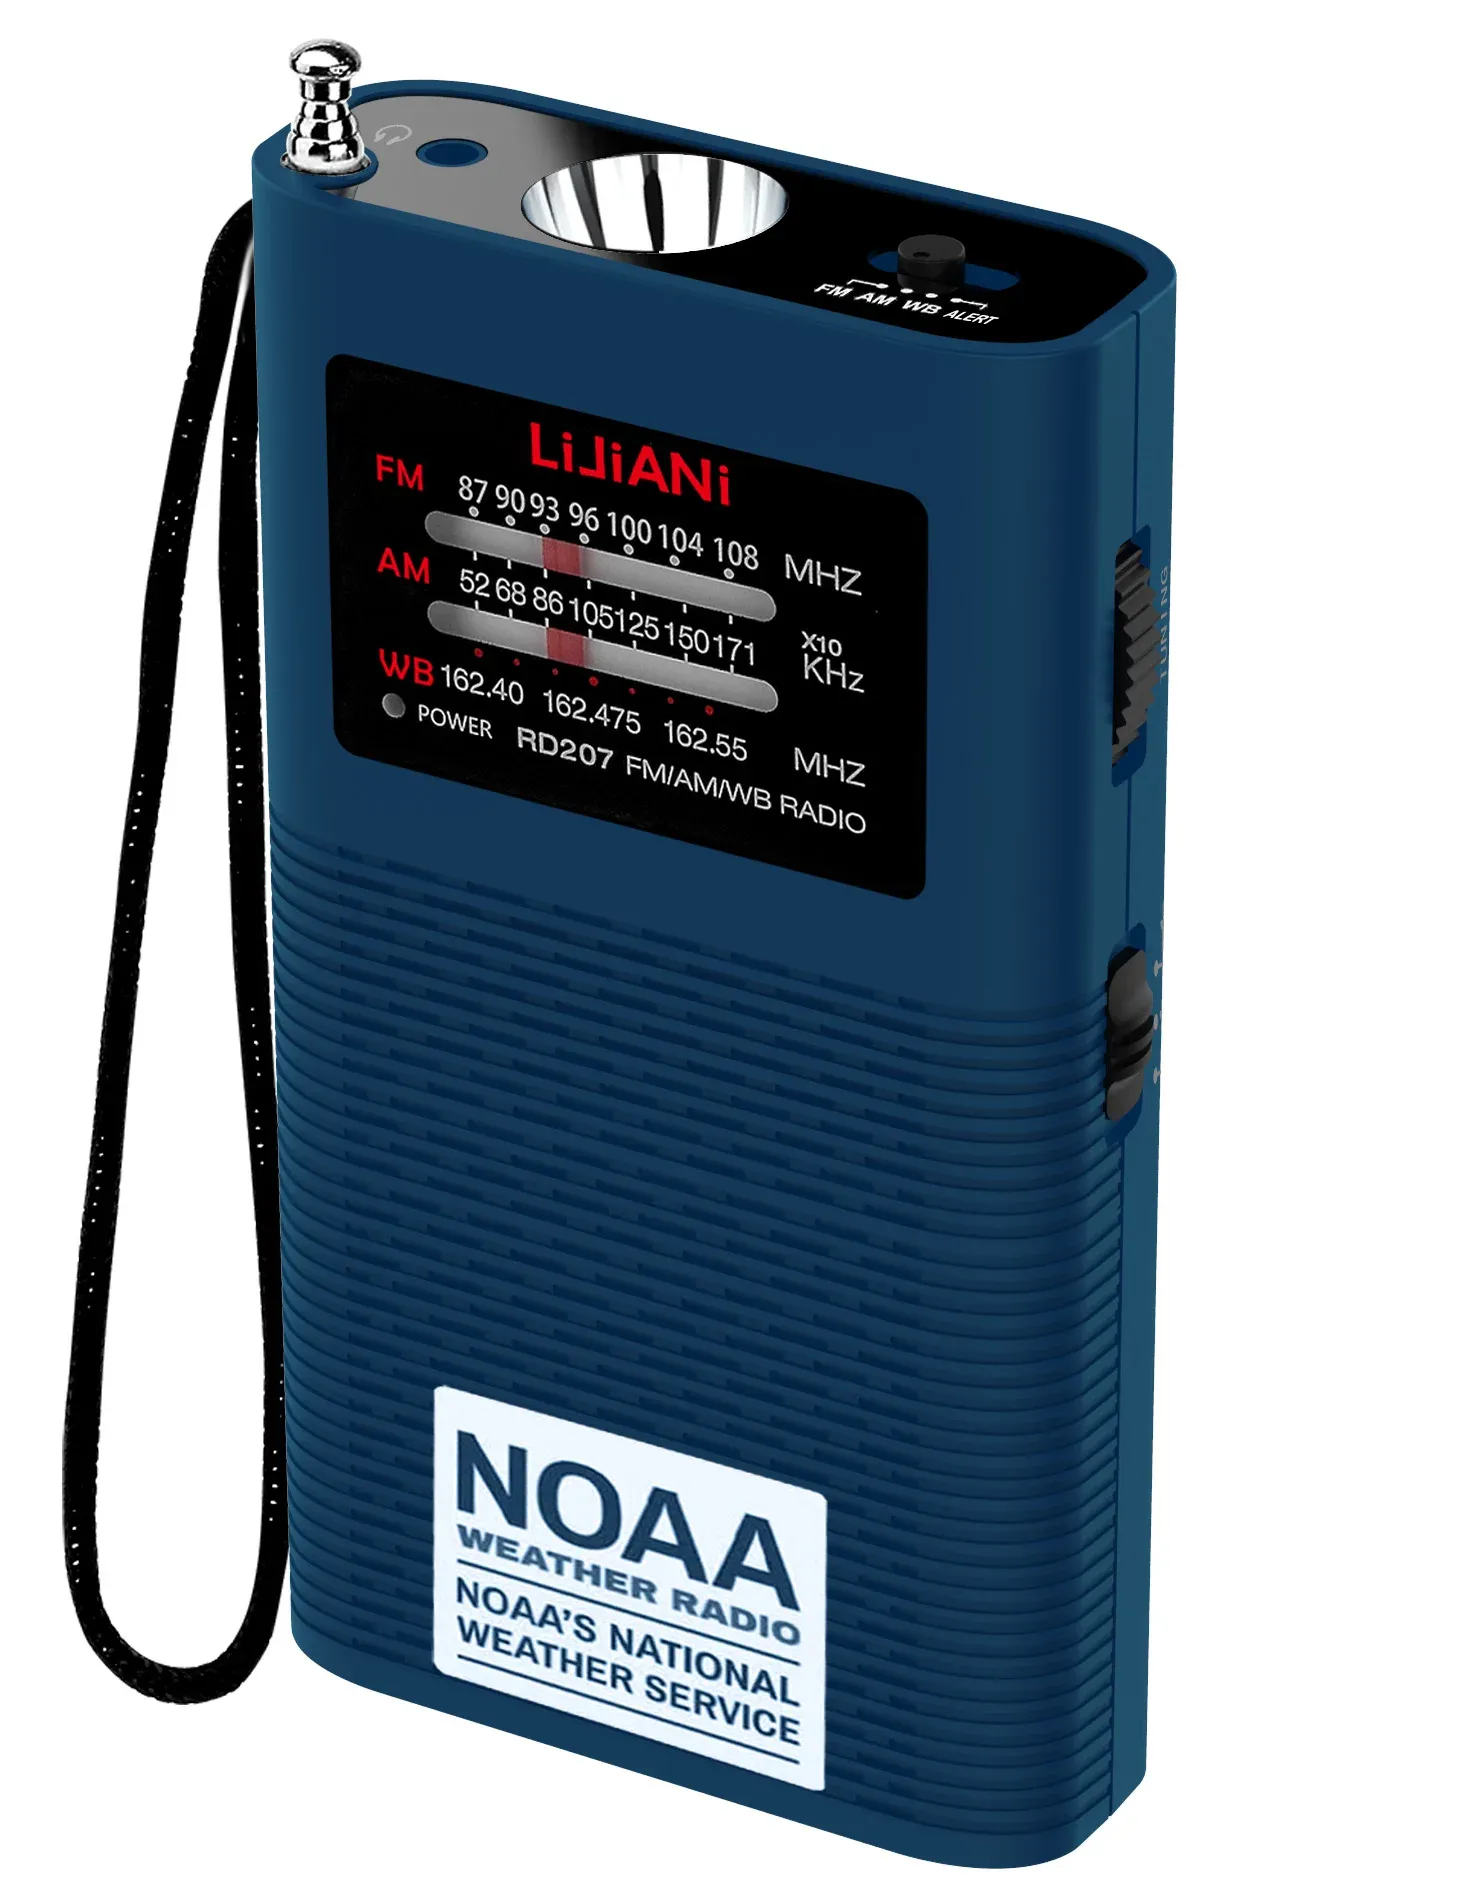 Radio NOAA Weather Radio Portable AM FM Transistor Battery Operated by 1500MAH(Included)with Strong FlashlinghtUS only version.